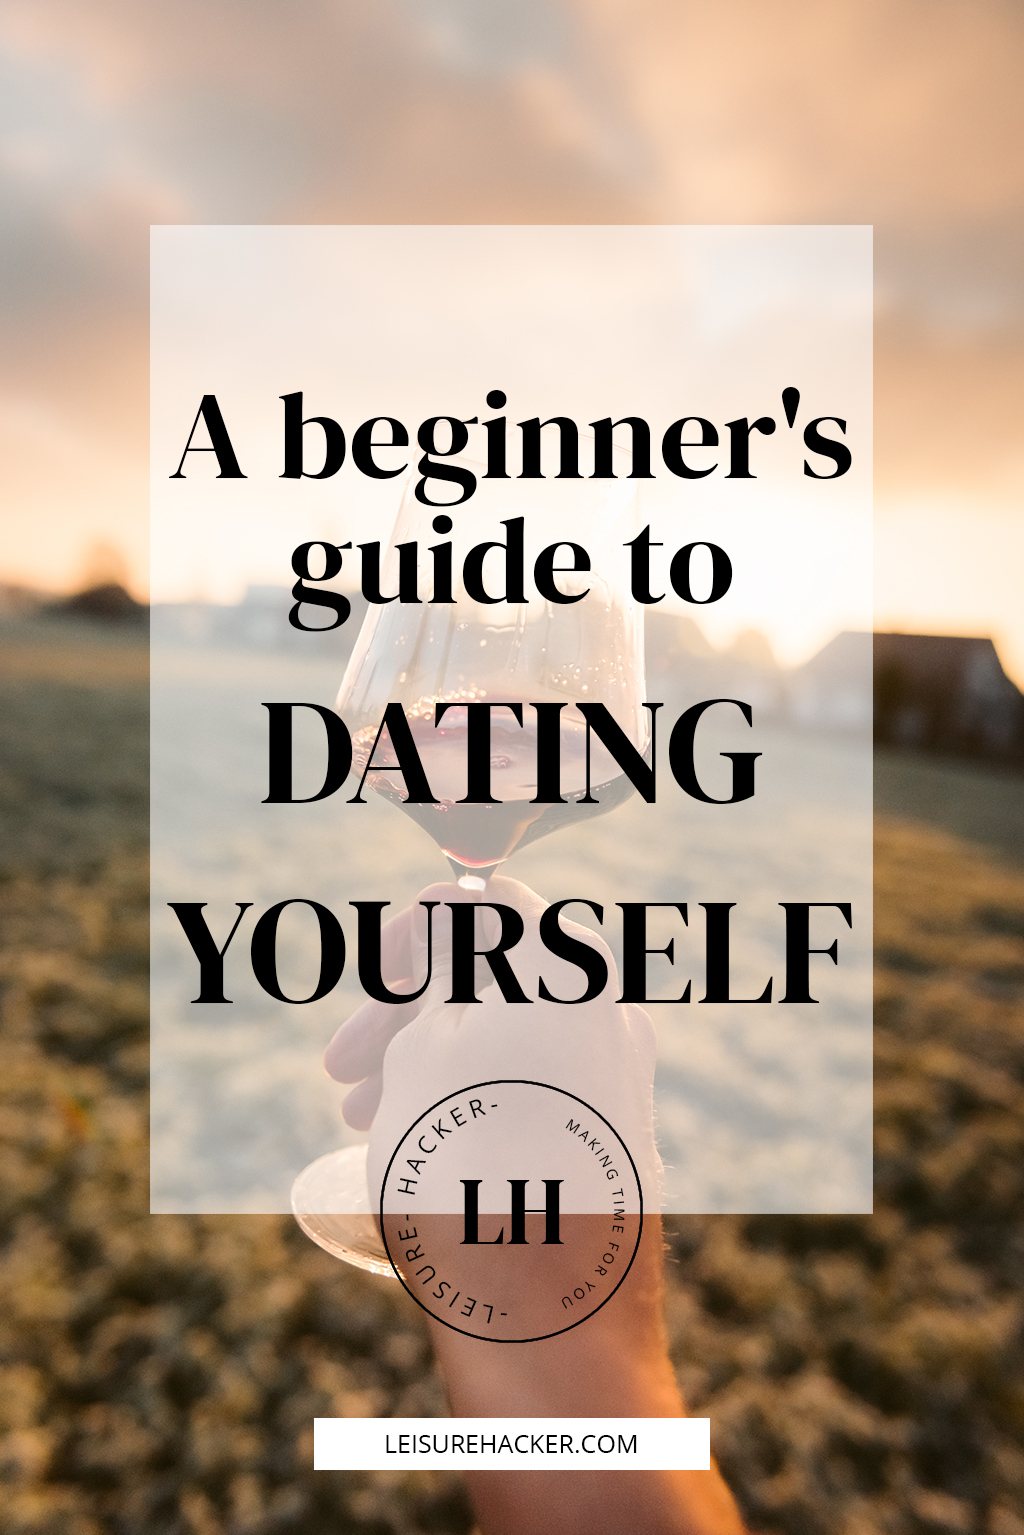 A beginner's guide to dating yourself